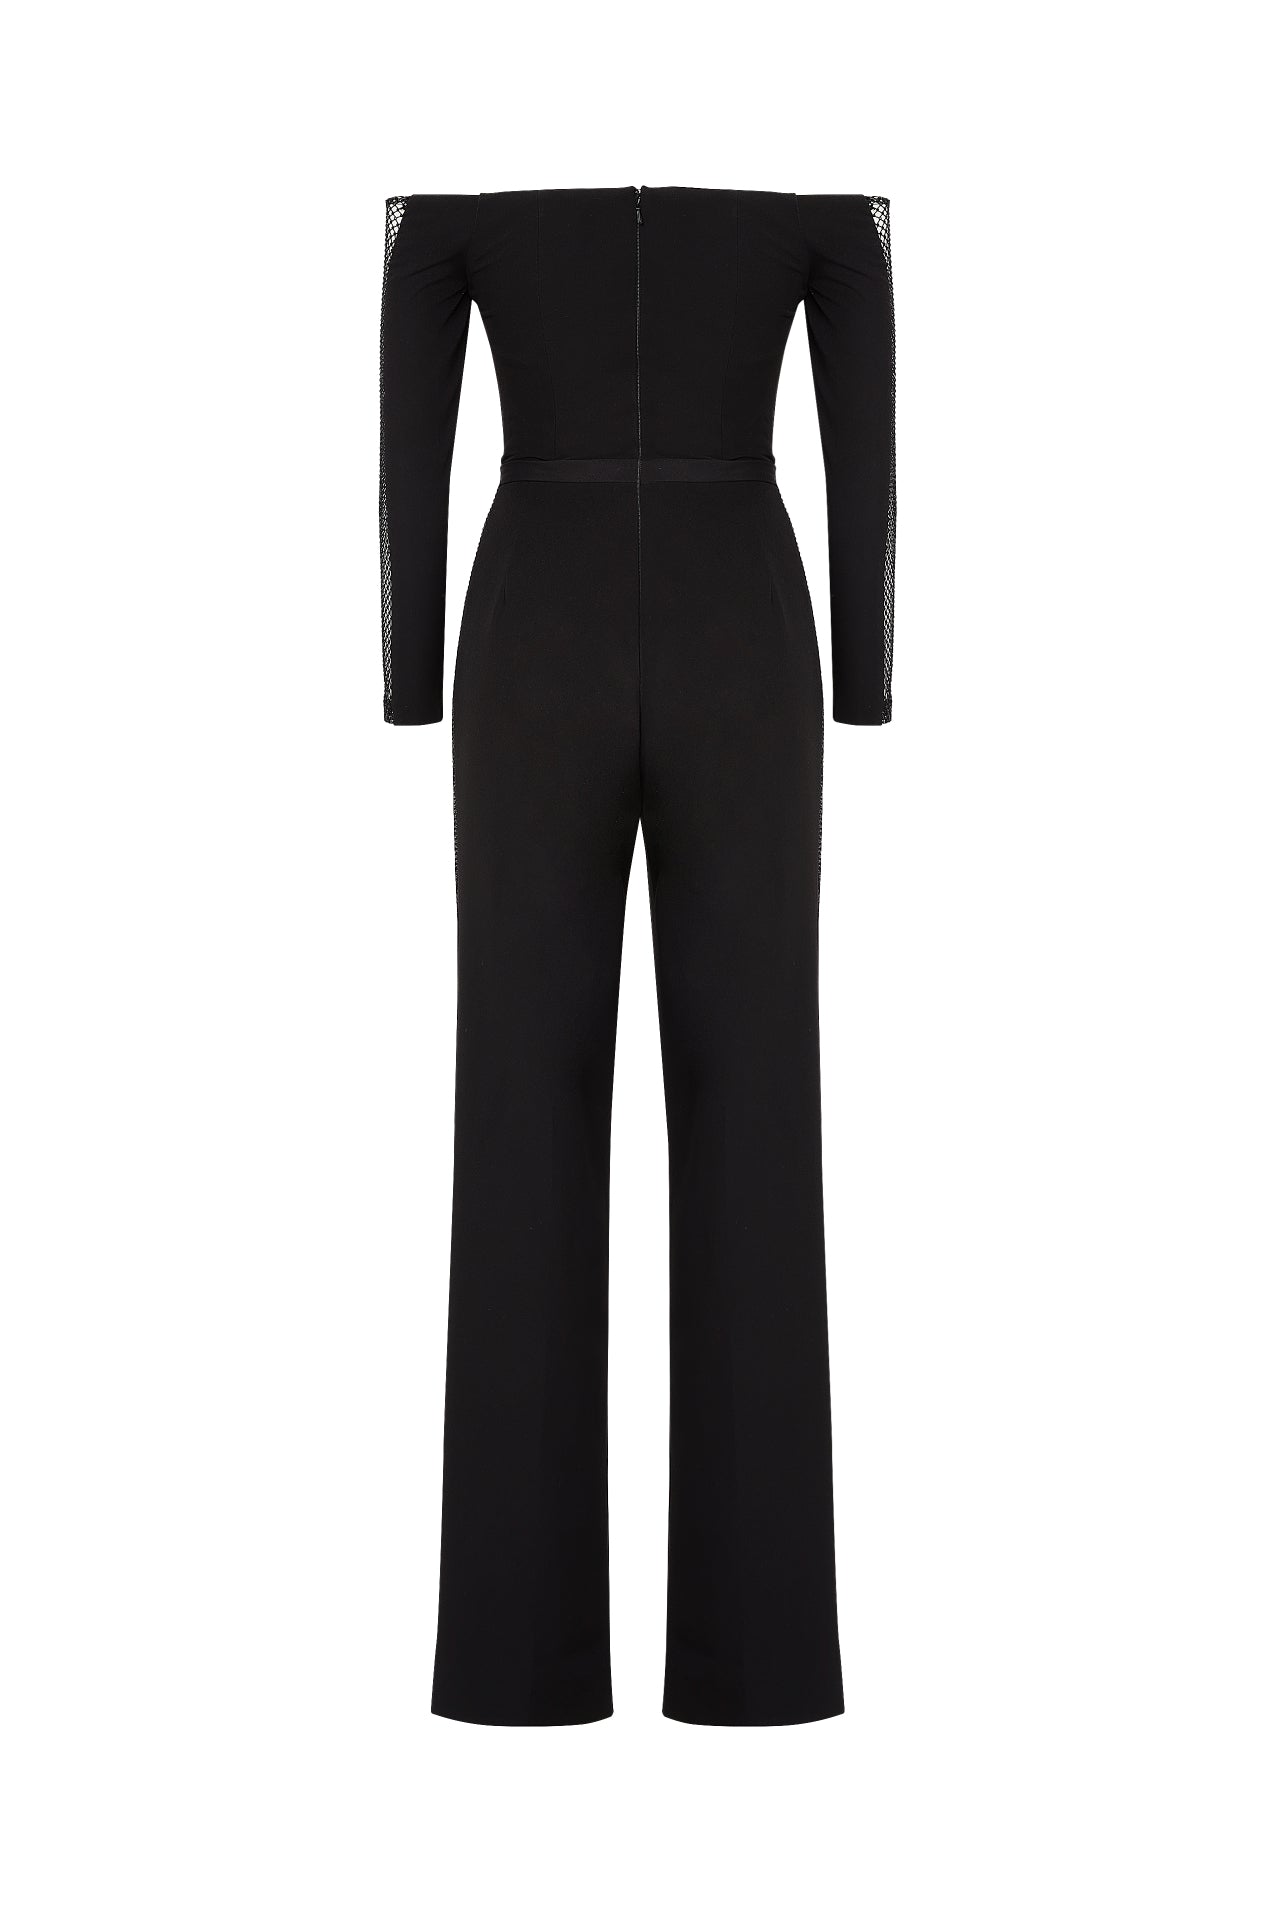 Off shoulder jumpsuit with transparent side inserts on sleeves and pants